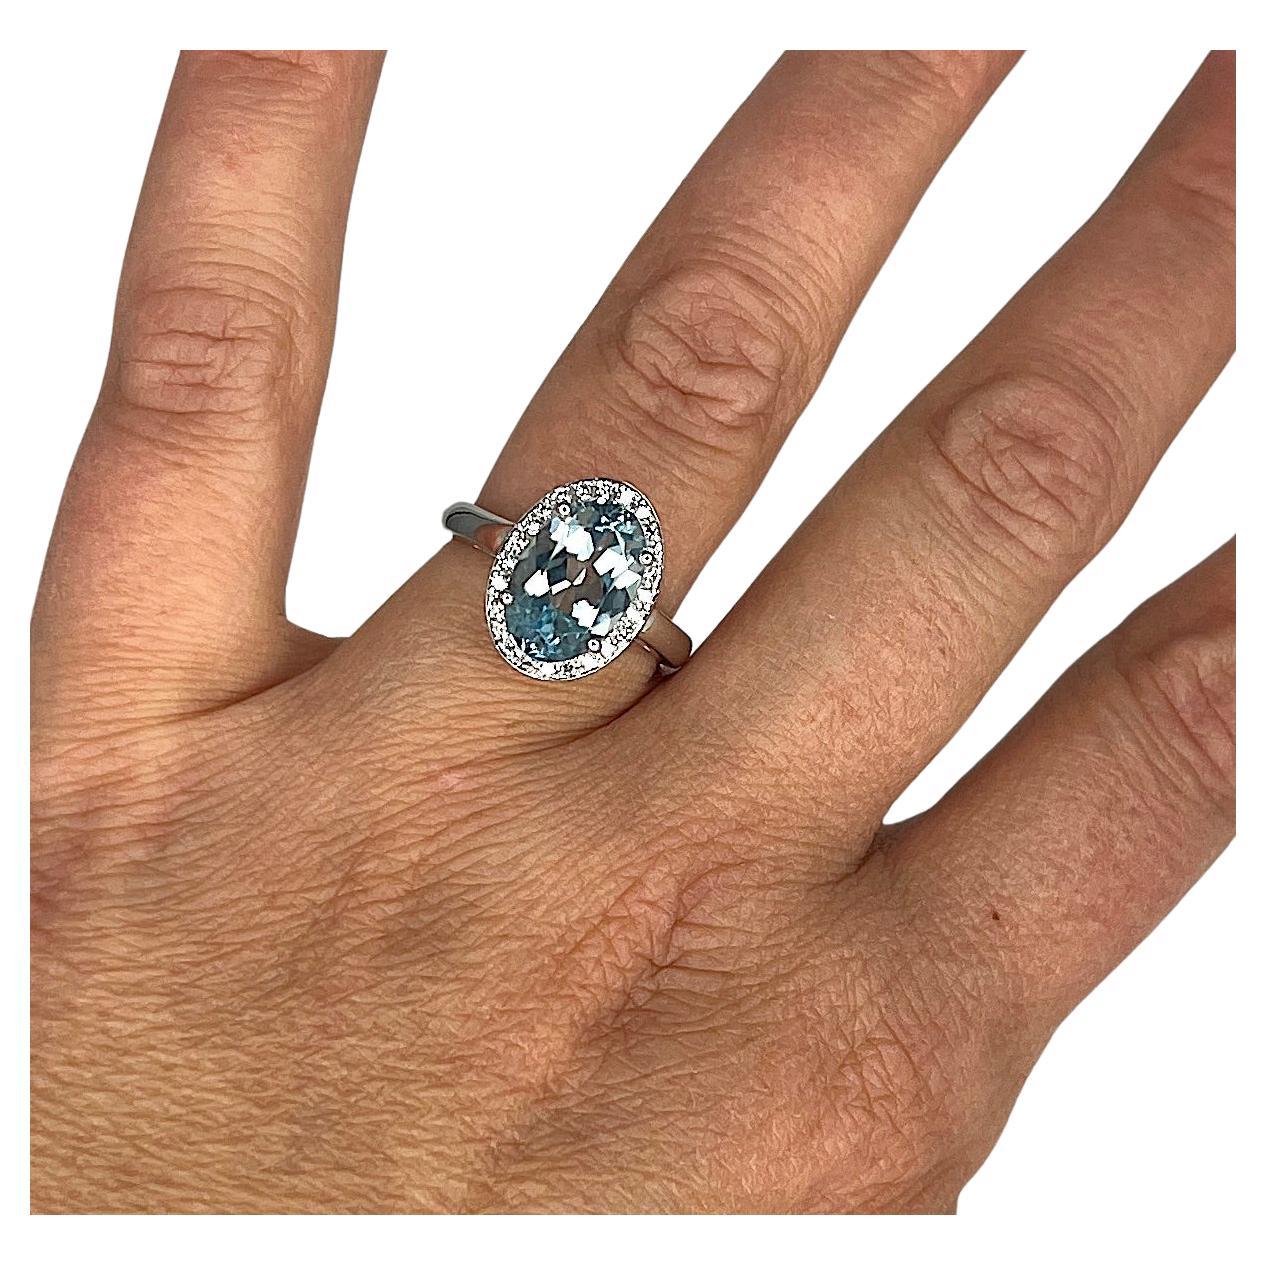 S.Georgios designer presents an oval shape 3.16 Carats Aquamarine ring with a White Diamond Bezel with a total weight of 0.20 Carat weight. This simple yet stunning ring is handmade from 18 Karat White gold in Athens Greece. The ring features a